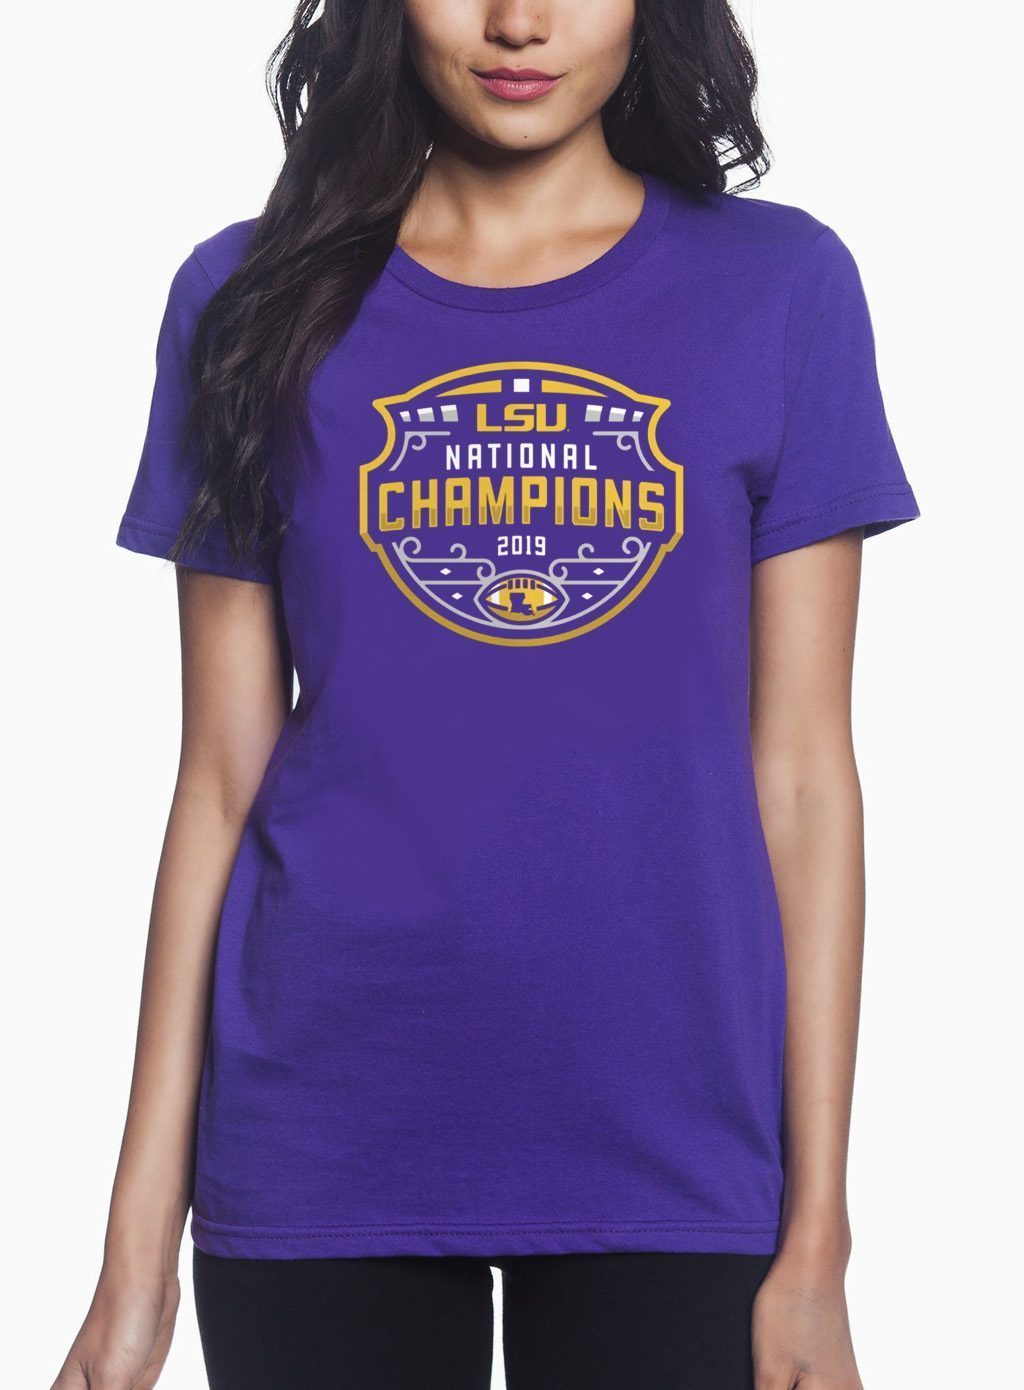 LSU National Championship Official T-Shirt - ReviewsTees Store